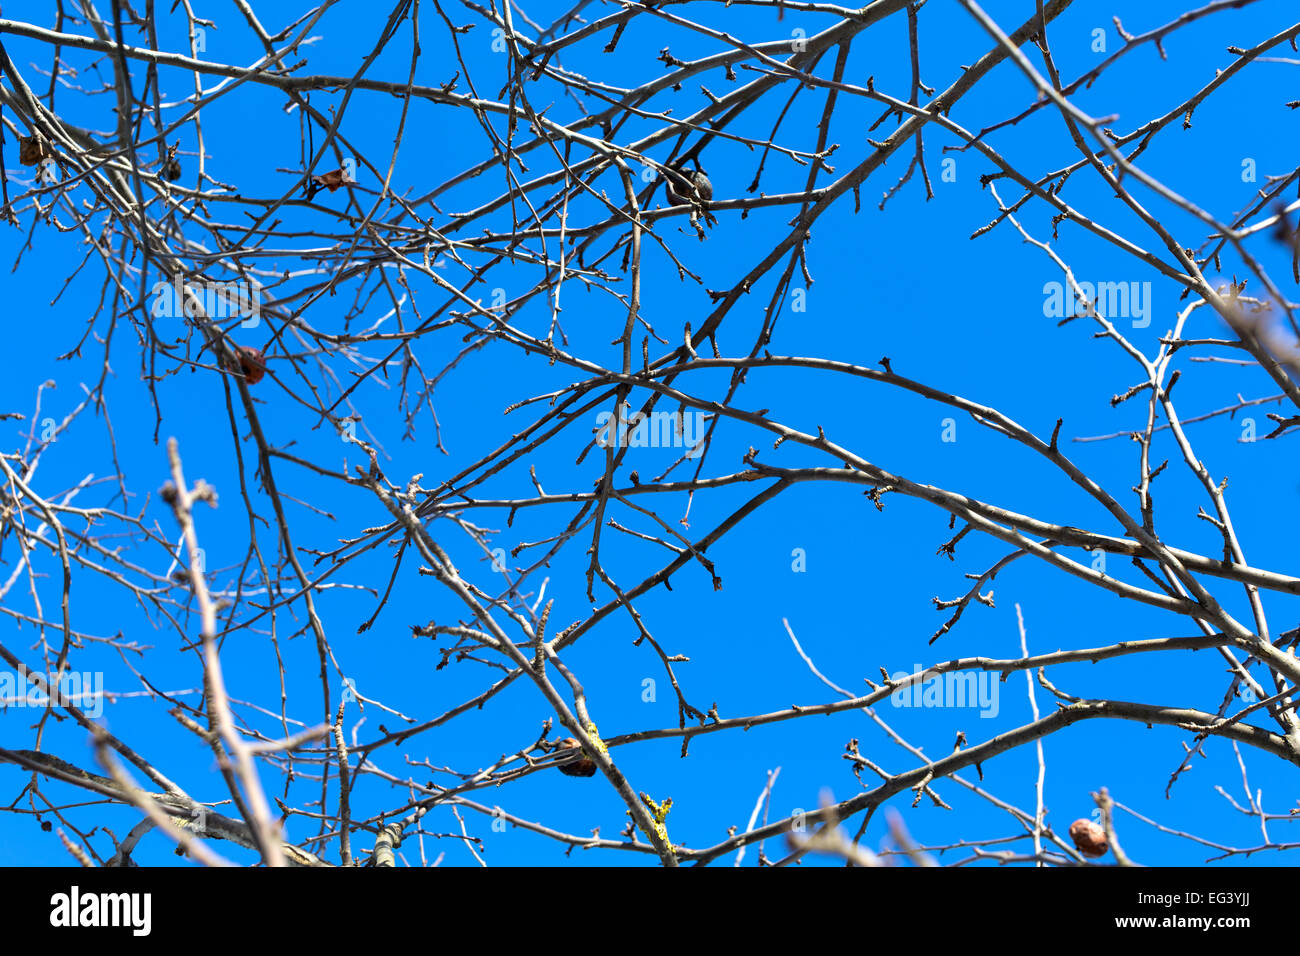 Branches of apple trees Stock Photo